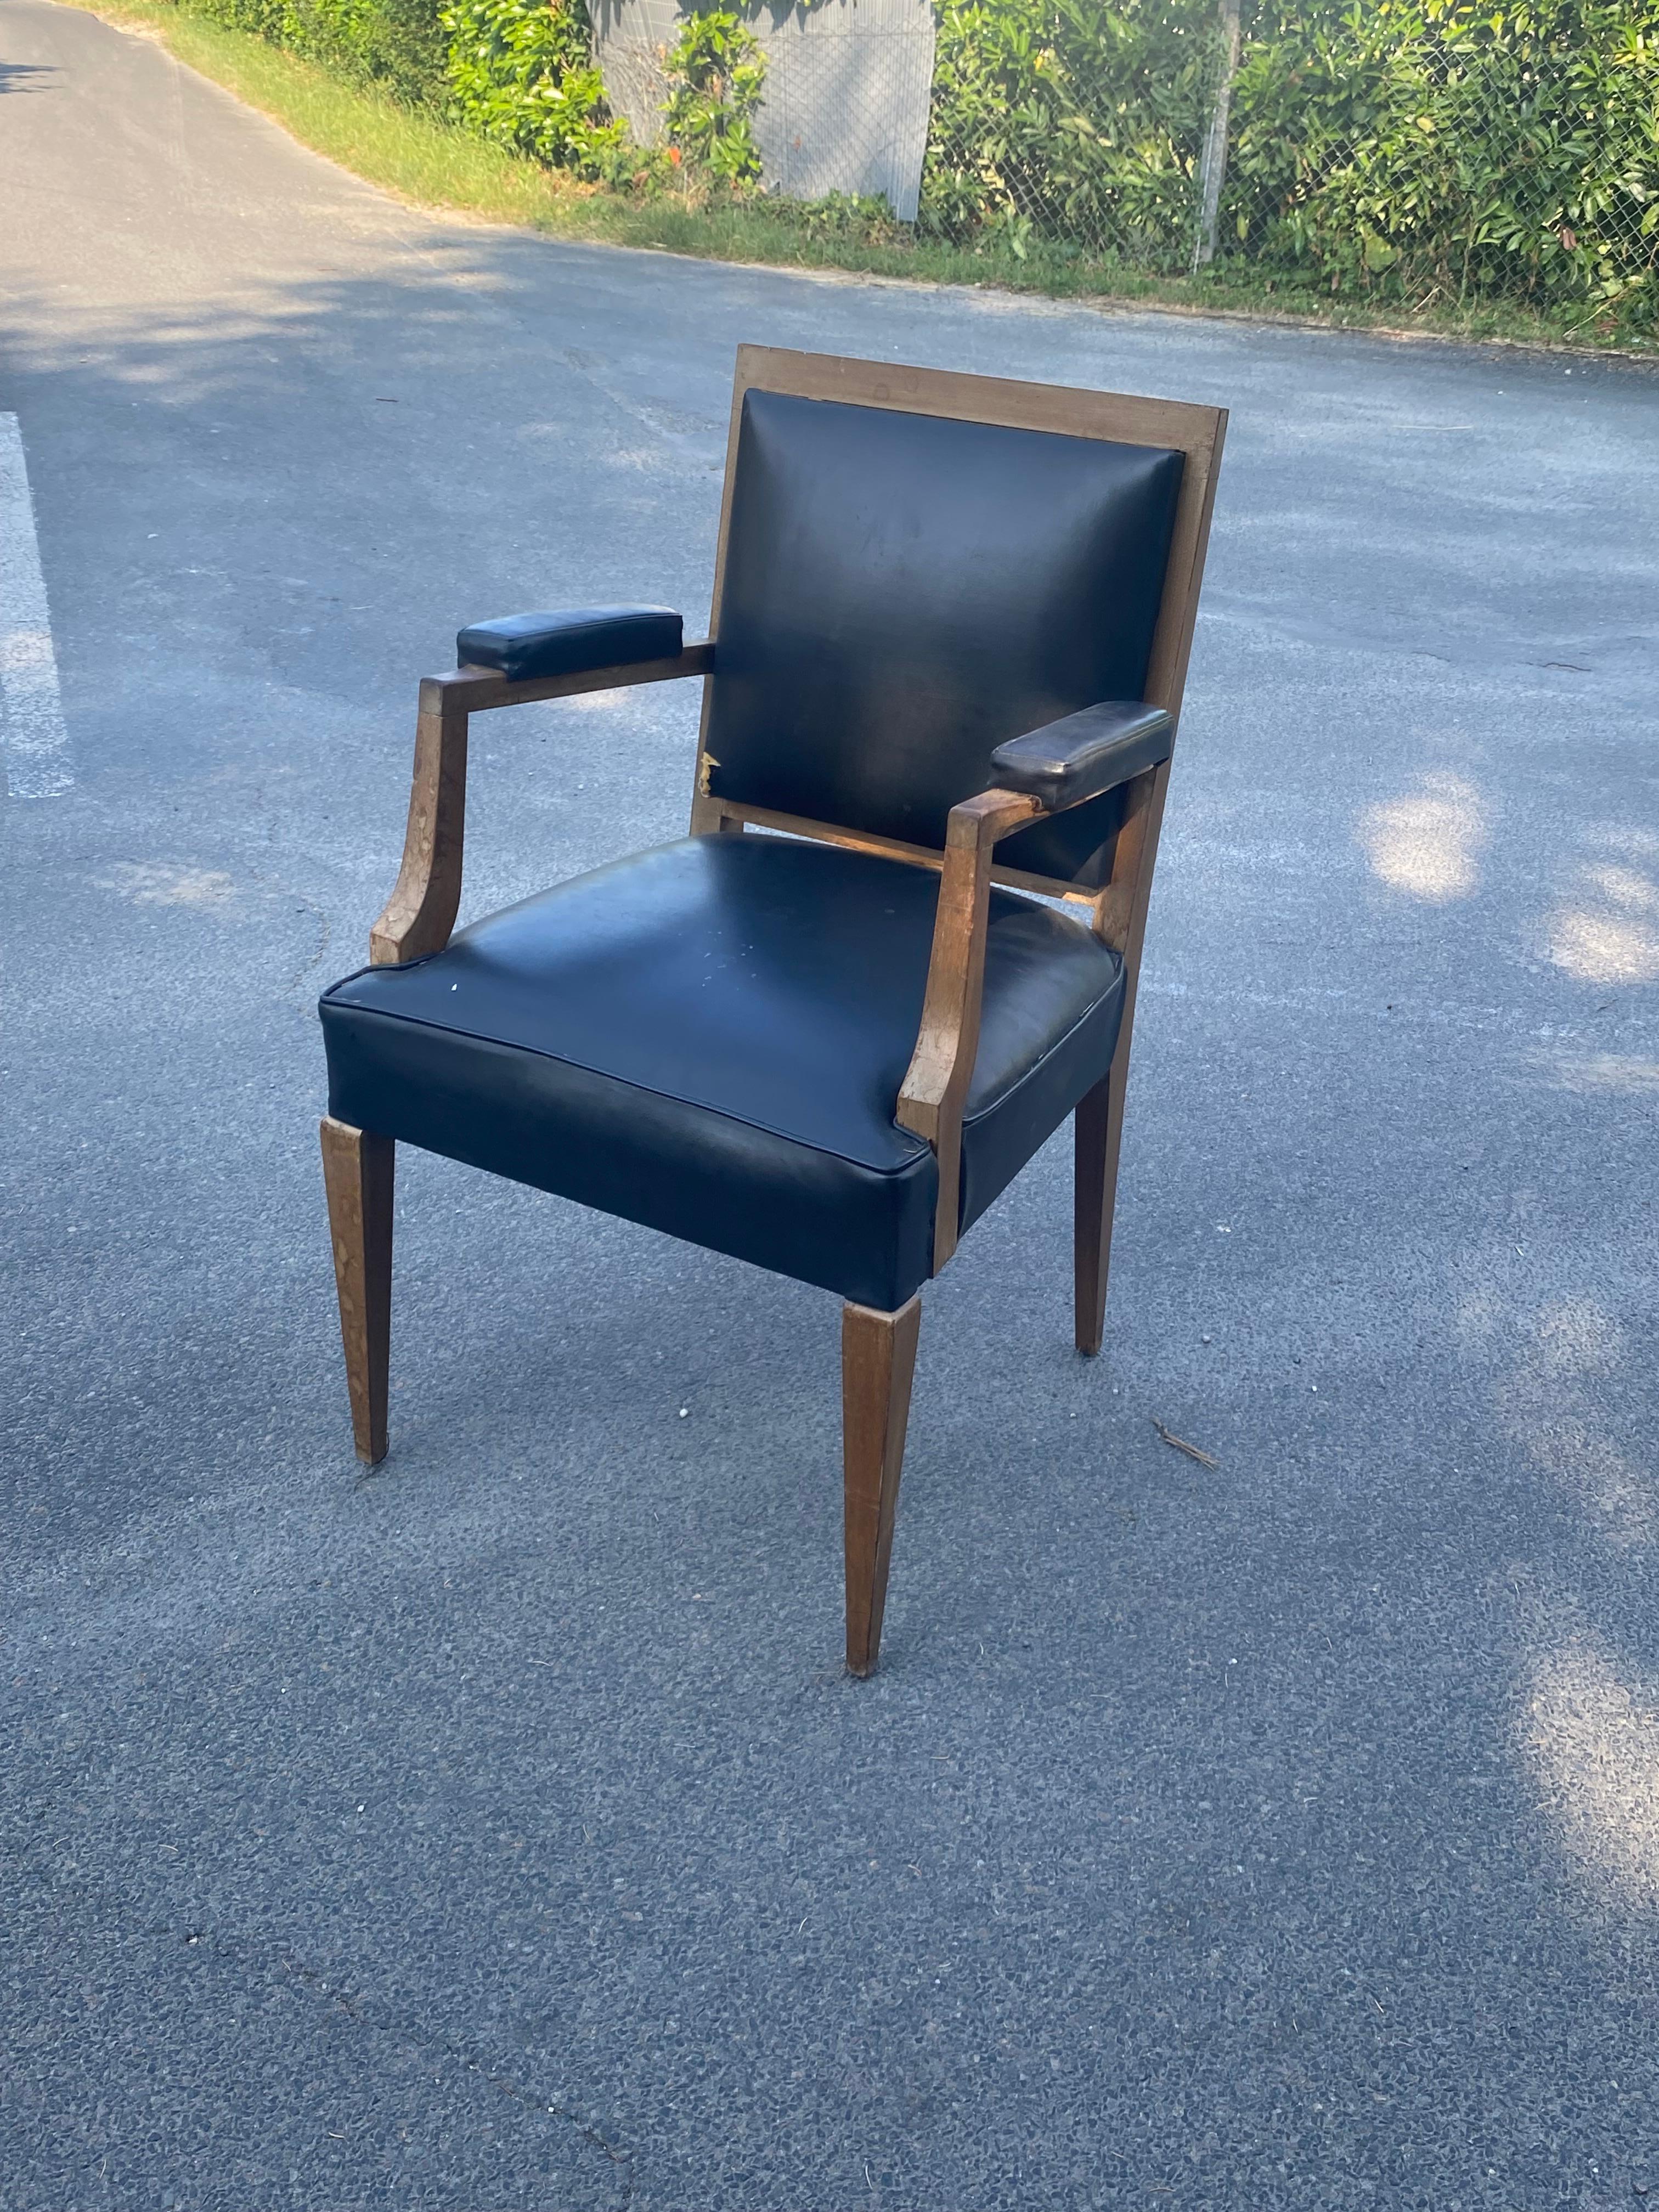 Art Deco armchair in walnut in the style of
Andre Arbus
circa 1940
patina to redoo
upholstery to be redone, a tear in the backrest
2 armchairs are also available. in another ad